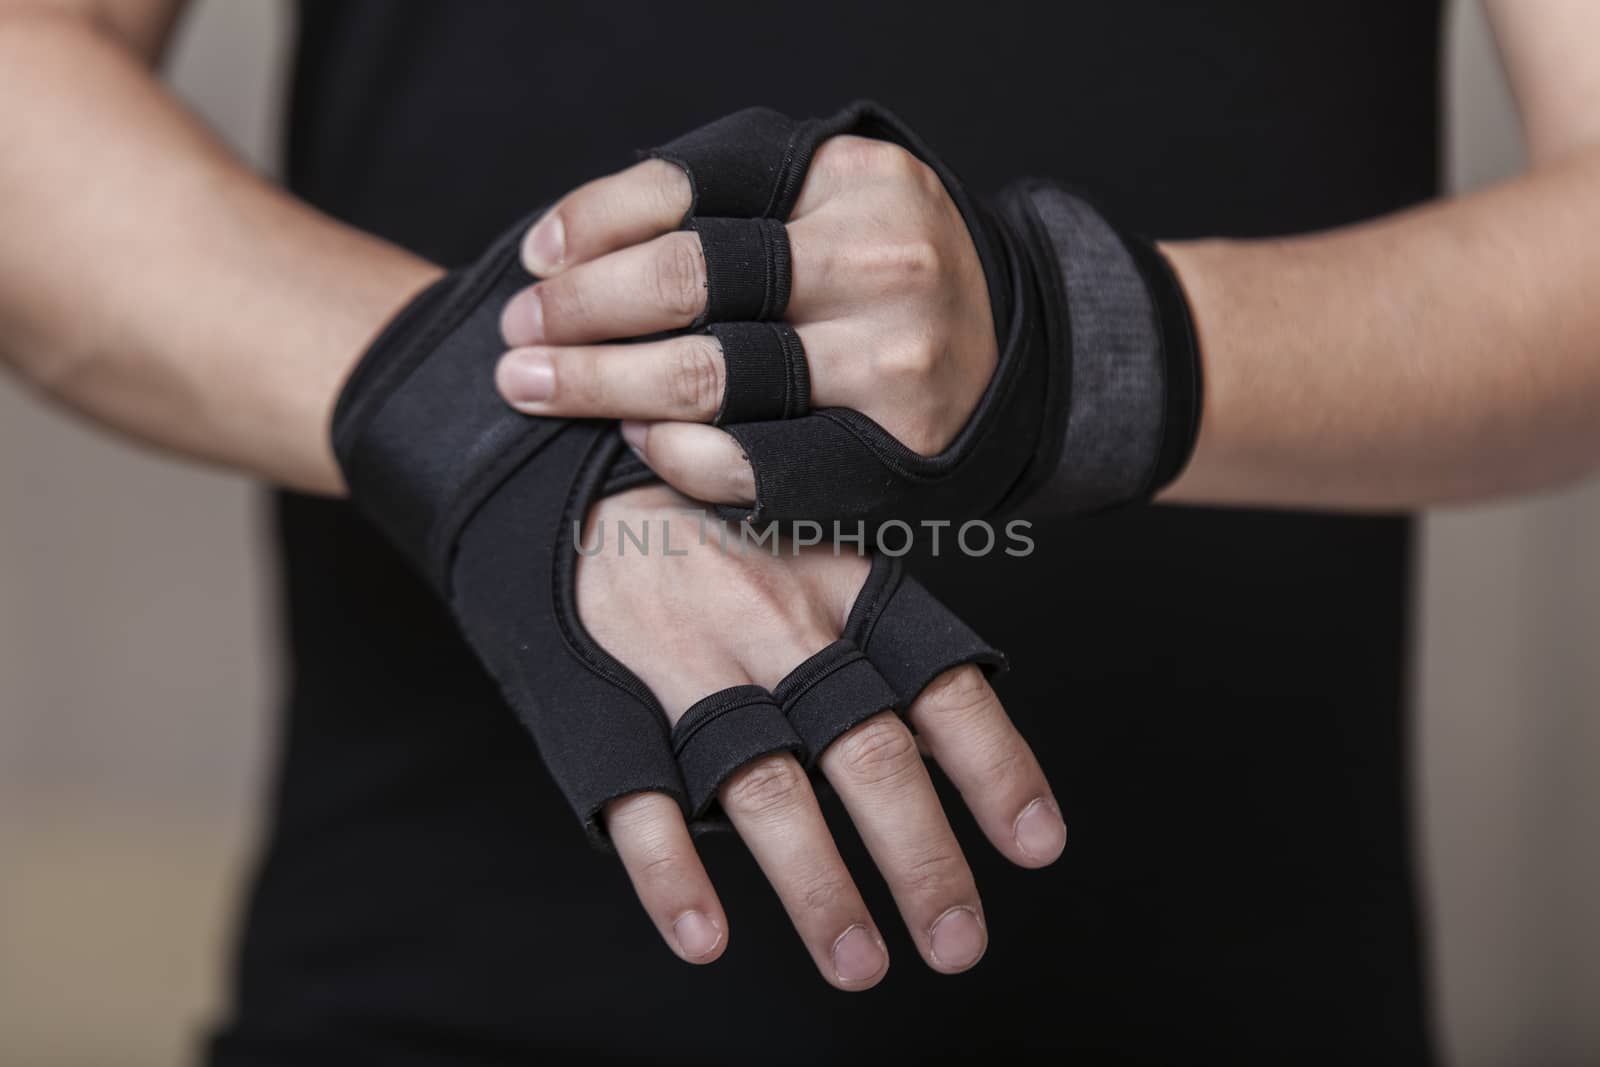 Man's hands put on sports gloves for a gym